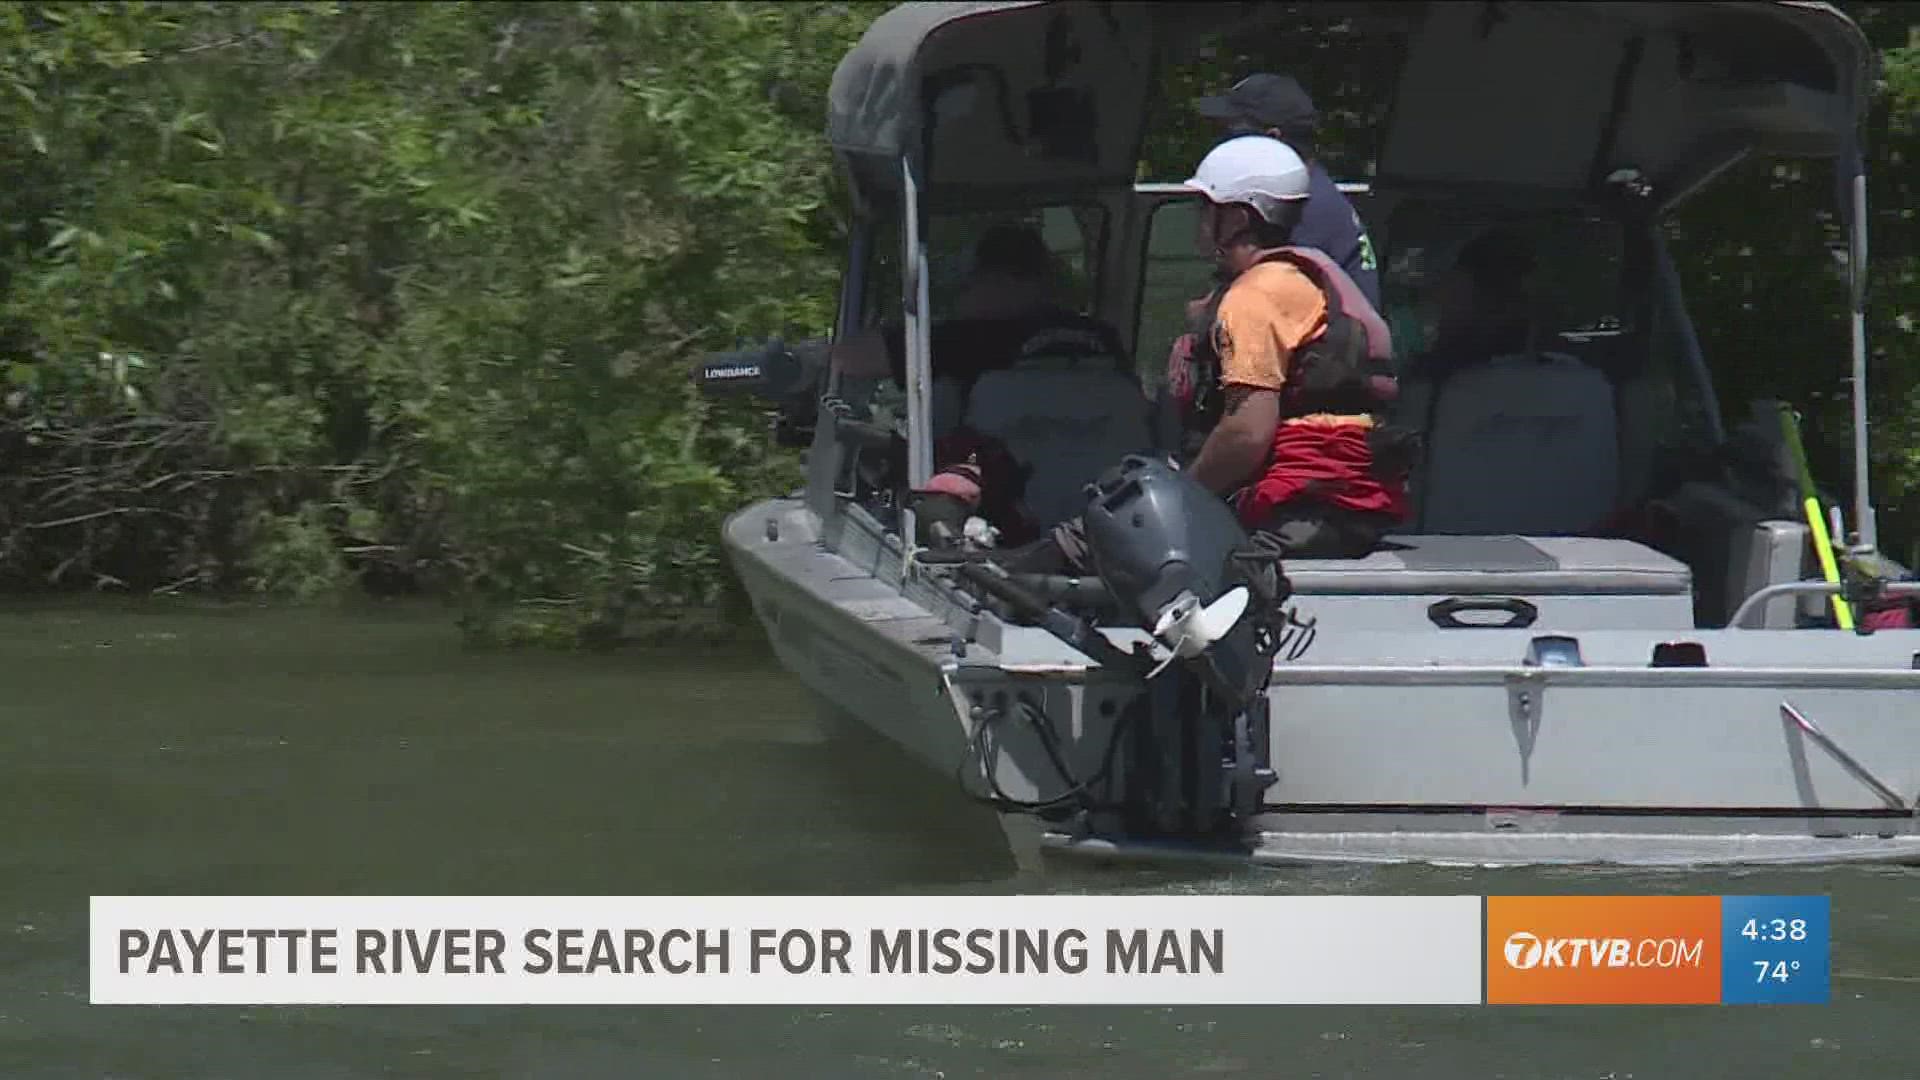 The Gem County Sheriff's Office is searching the Payette River for a man reported missing after falling off a float tube over the weekend.